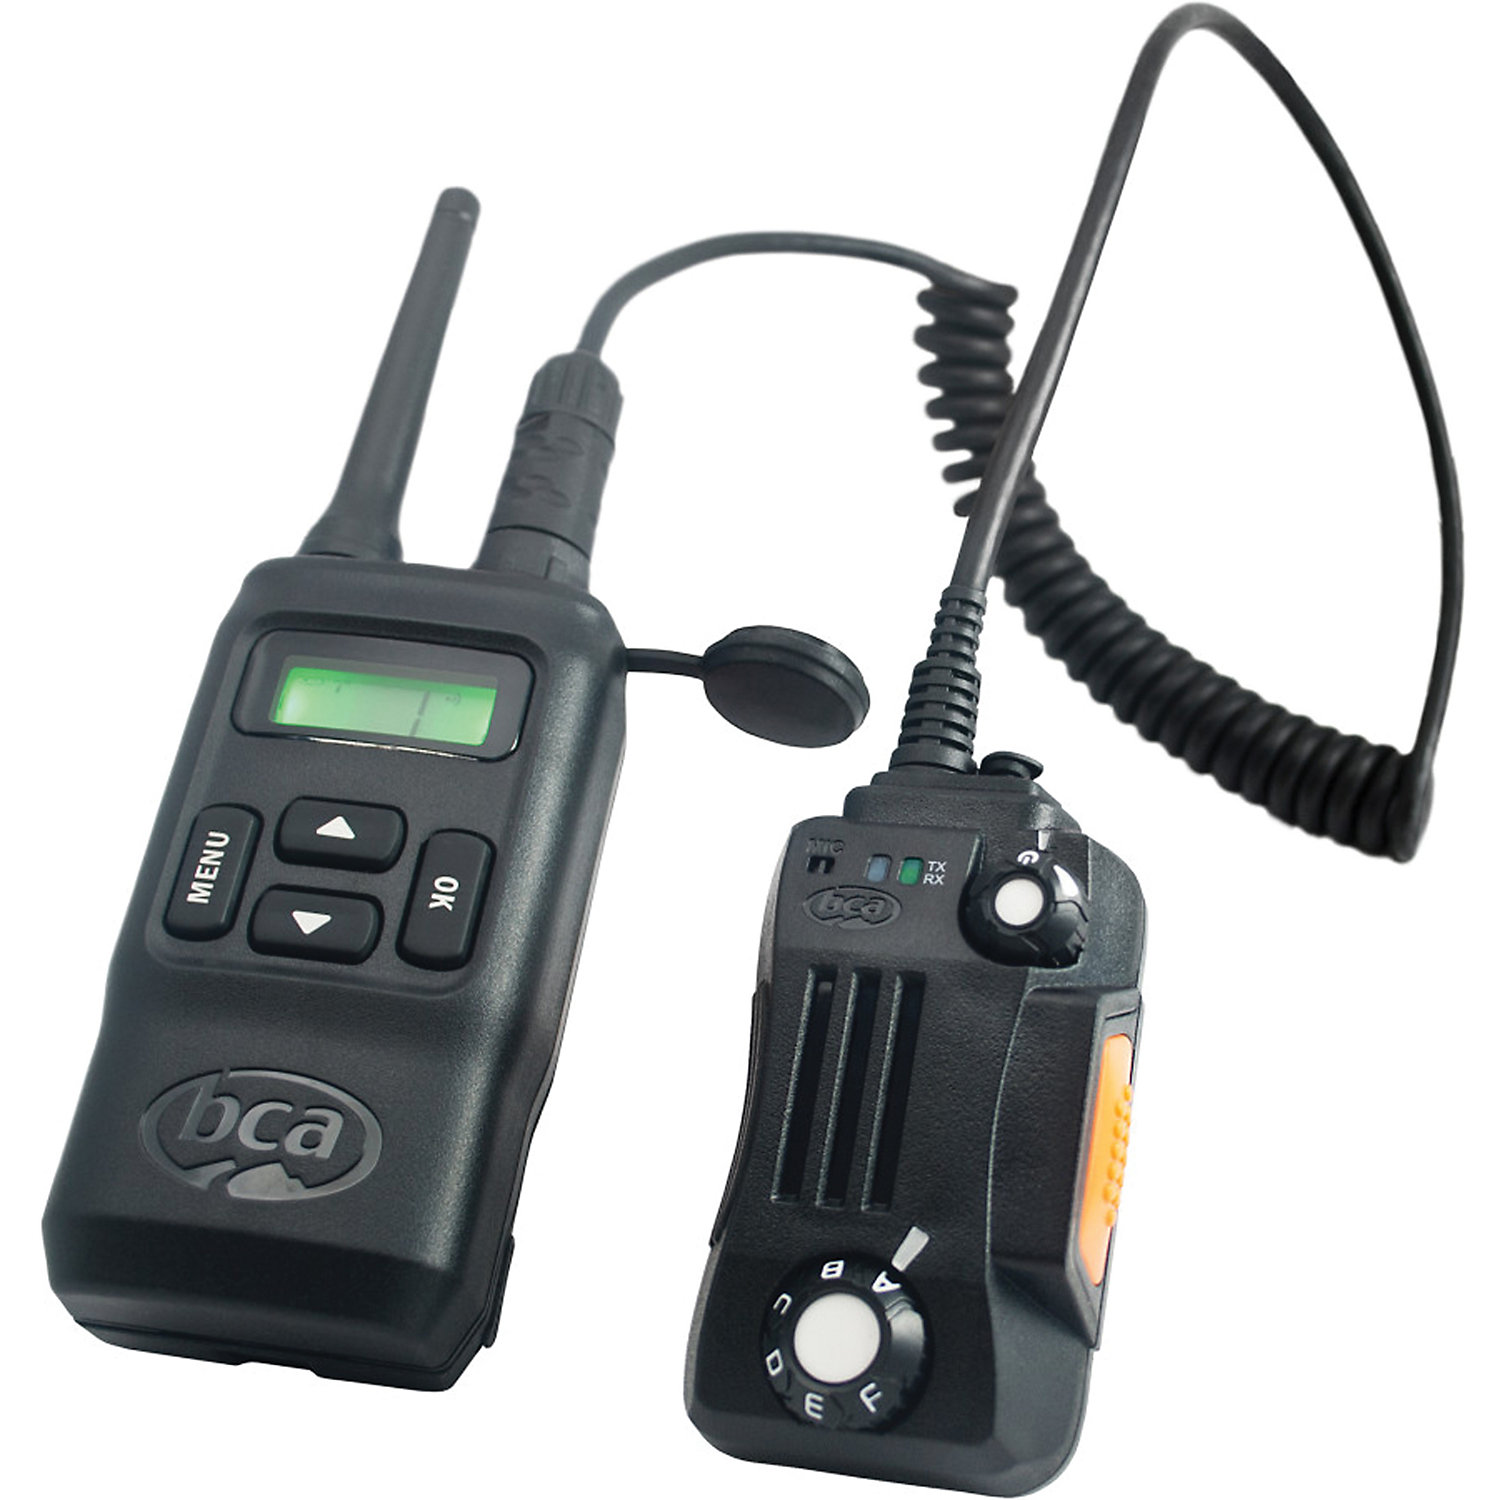 Backcountry Access Inc Backcountry Access BC Link Group Communication System